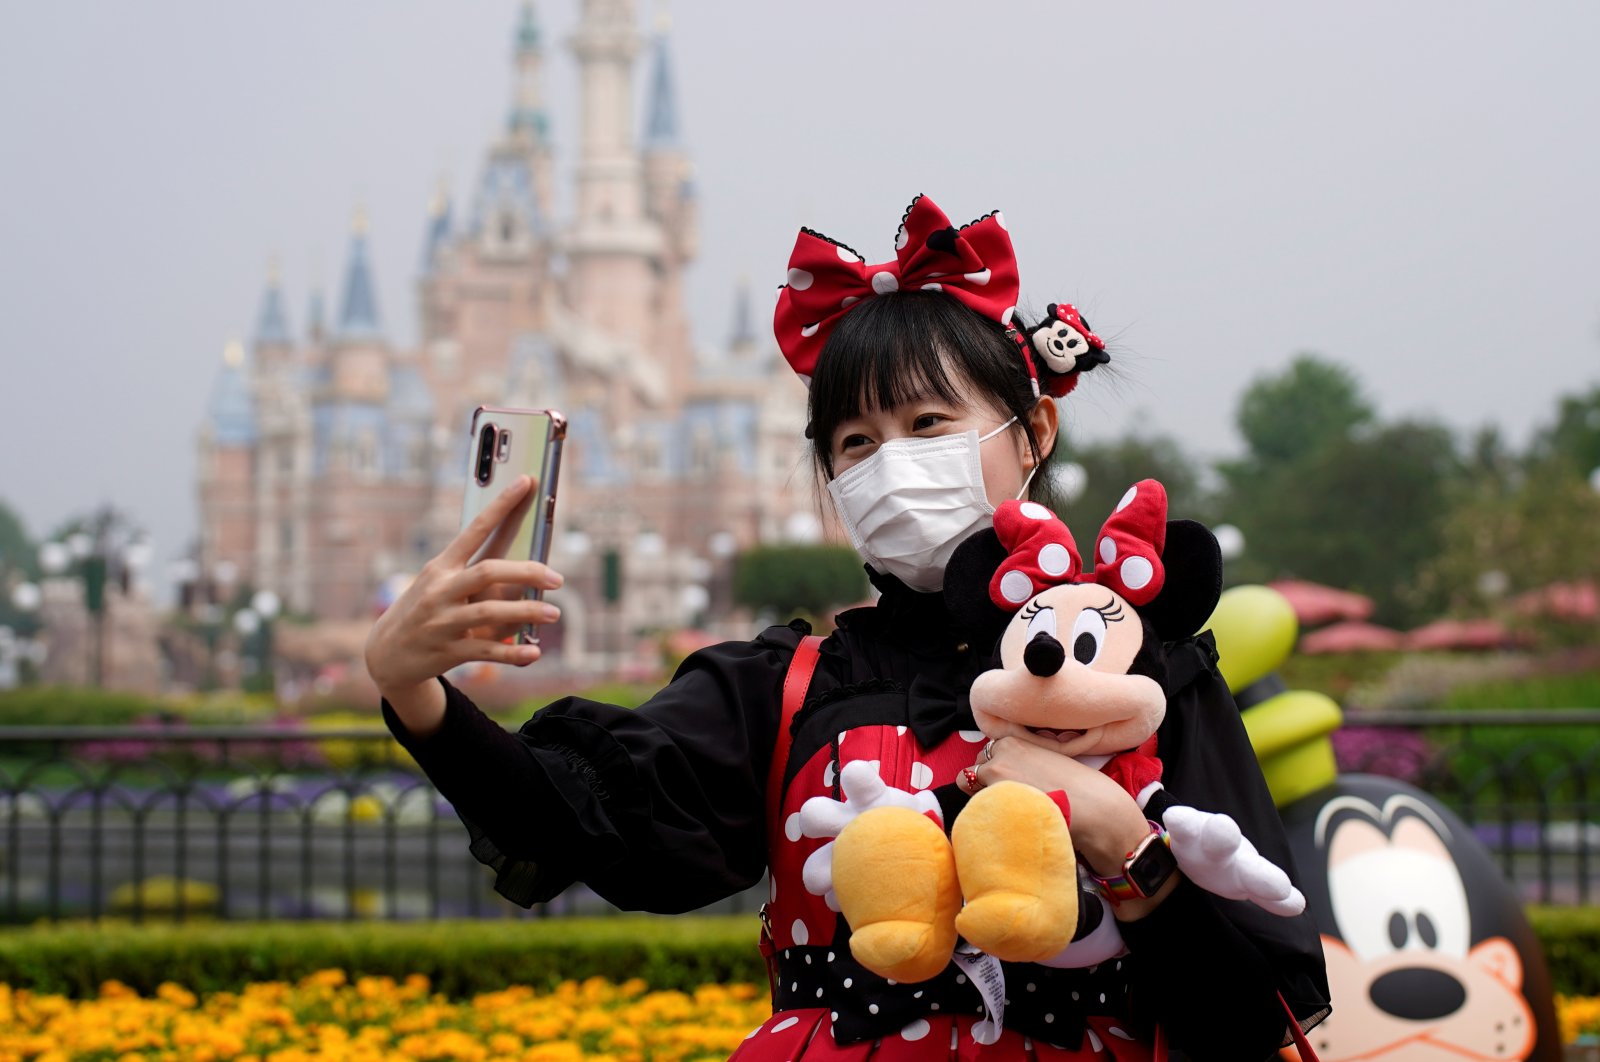 A visitor dressed as a Disney character takes a selfie while wearing a protective face mask at Shanghai Disney Resort as the Shanghai Disneyland theme park reopens following a shutdown due to the coronavirus outbreak, in Shanghai, China, May 11, 2020. (Reuters Photo)